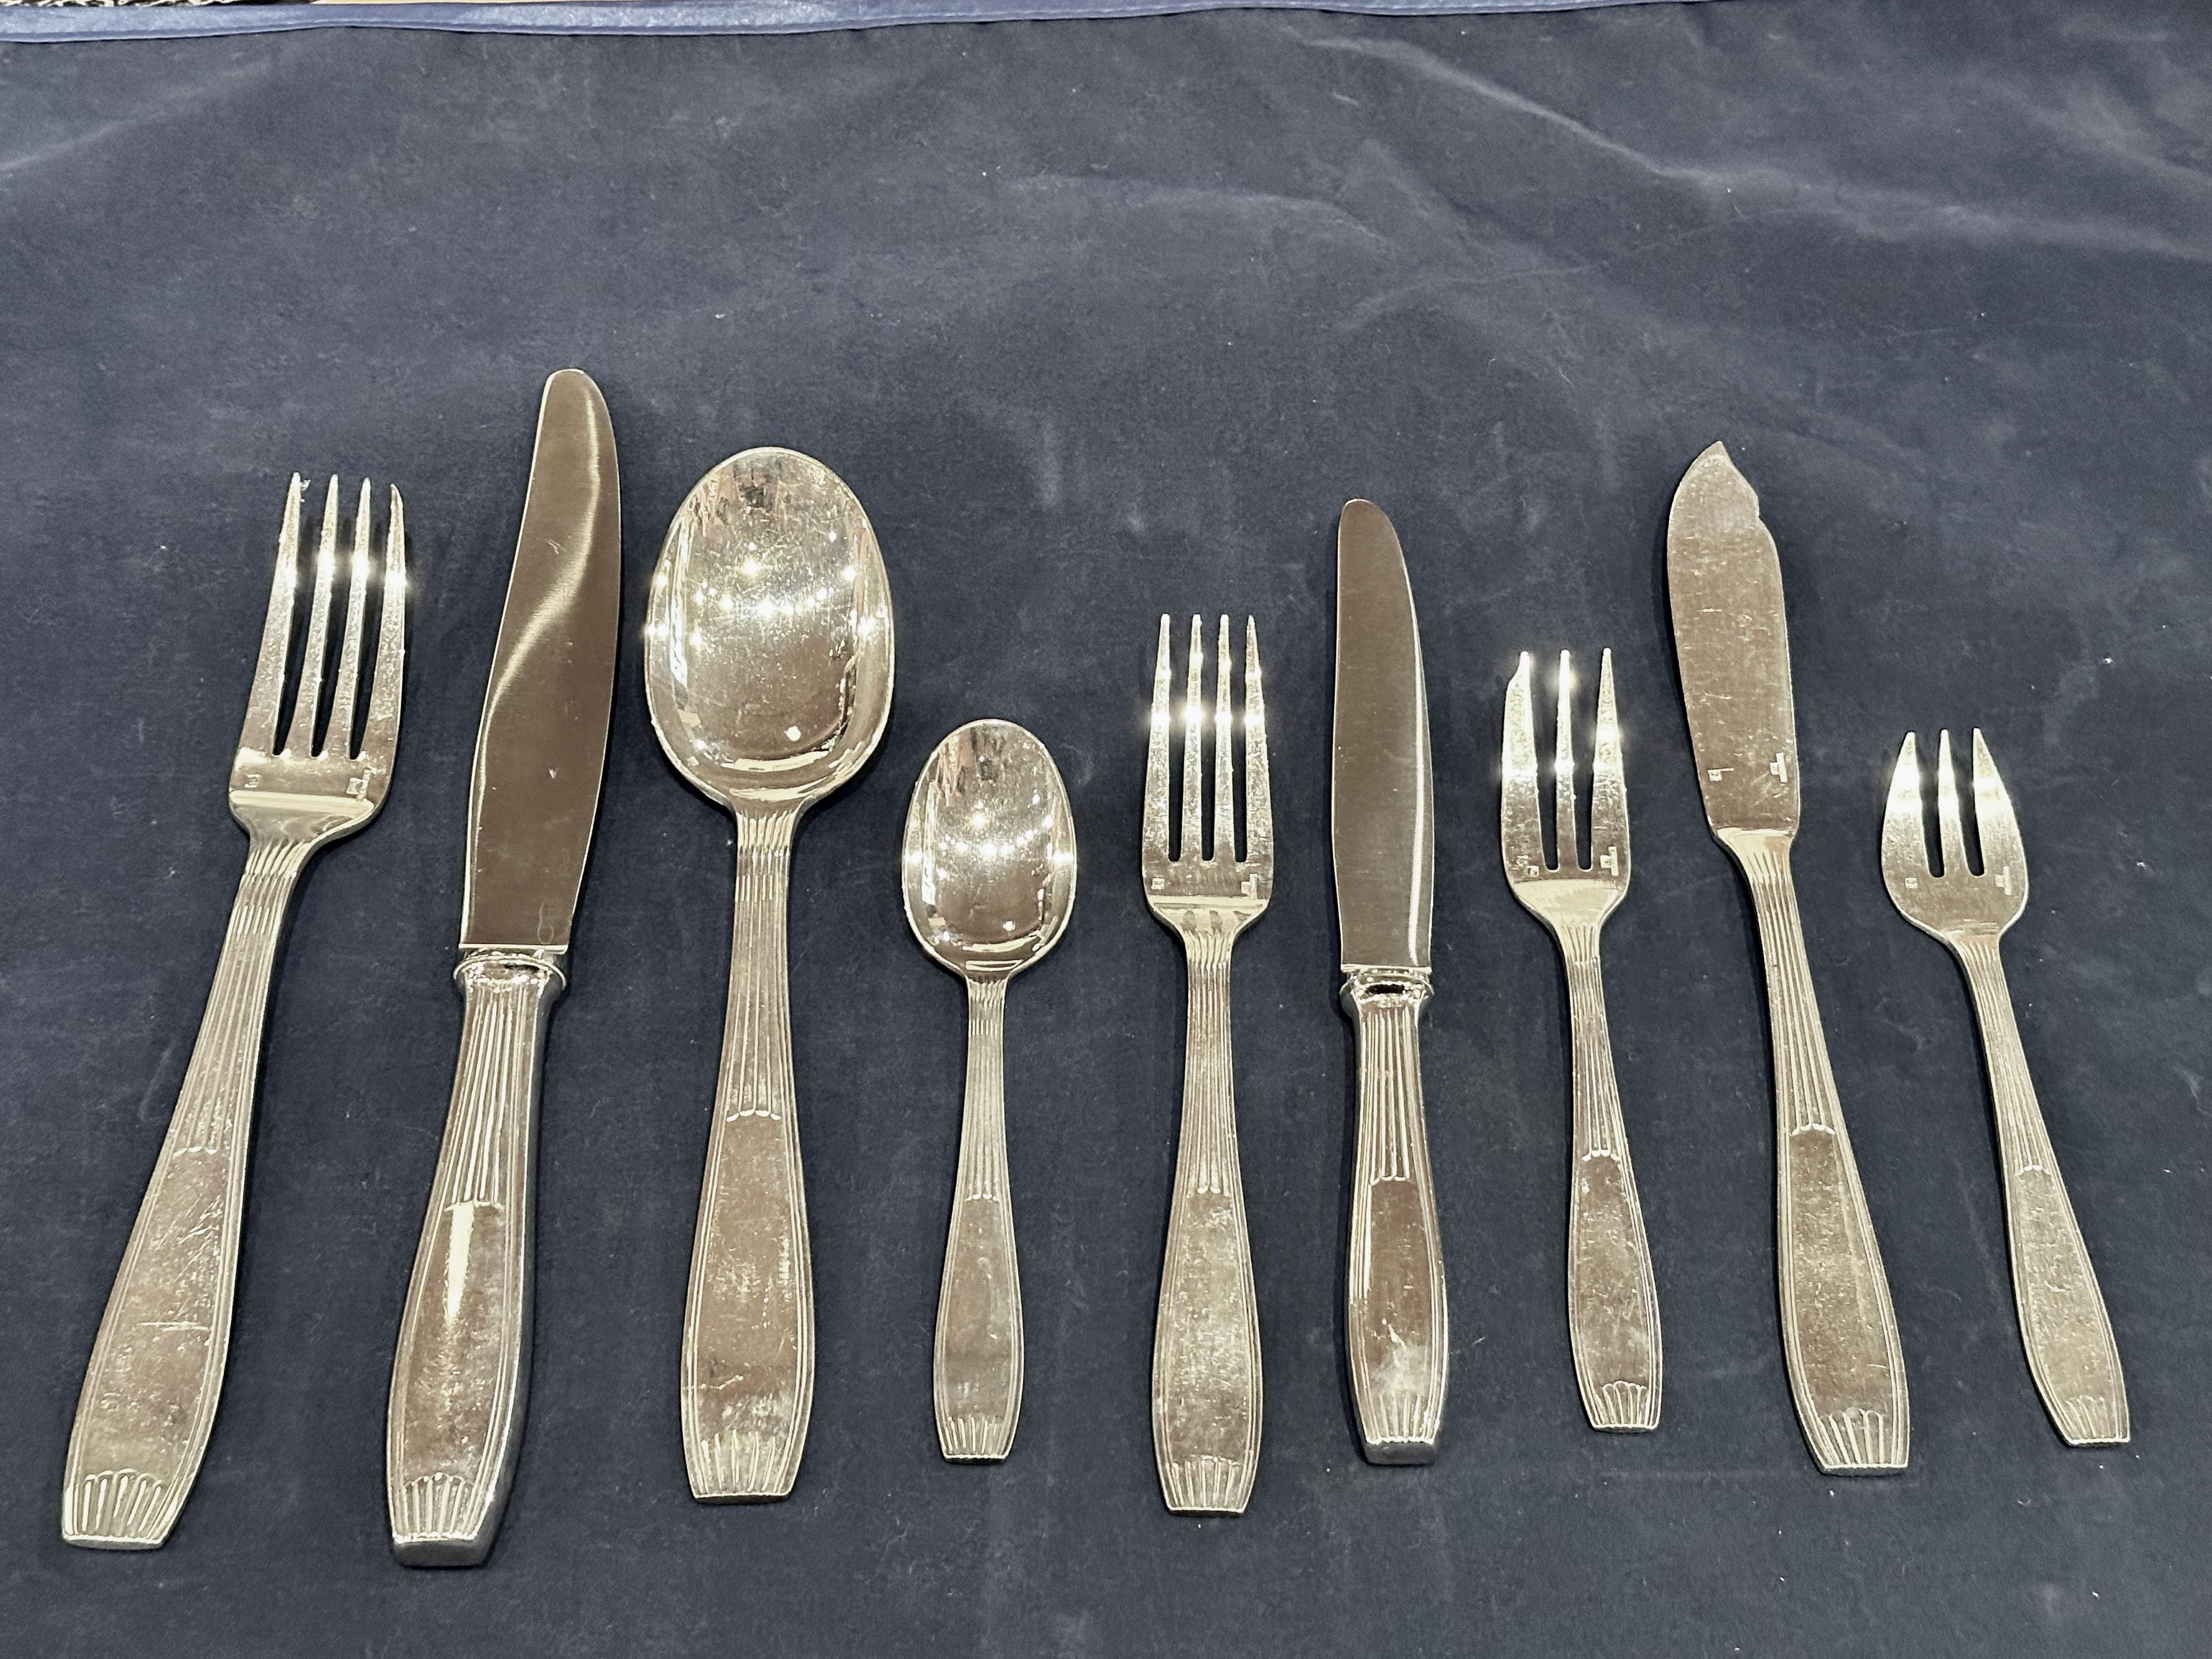 Silver Plate Complete Art Deco Silverware Service for 12 by Christofle in Fitted Wooden Chest